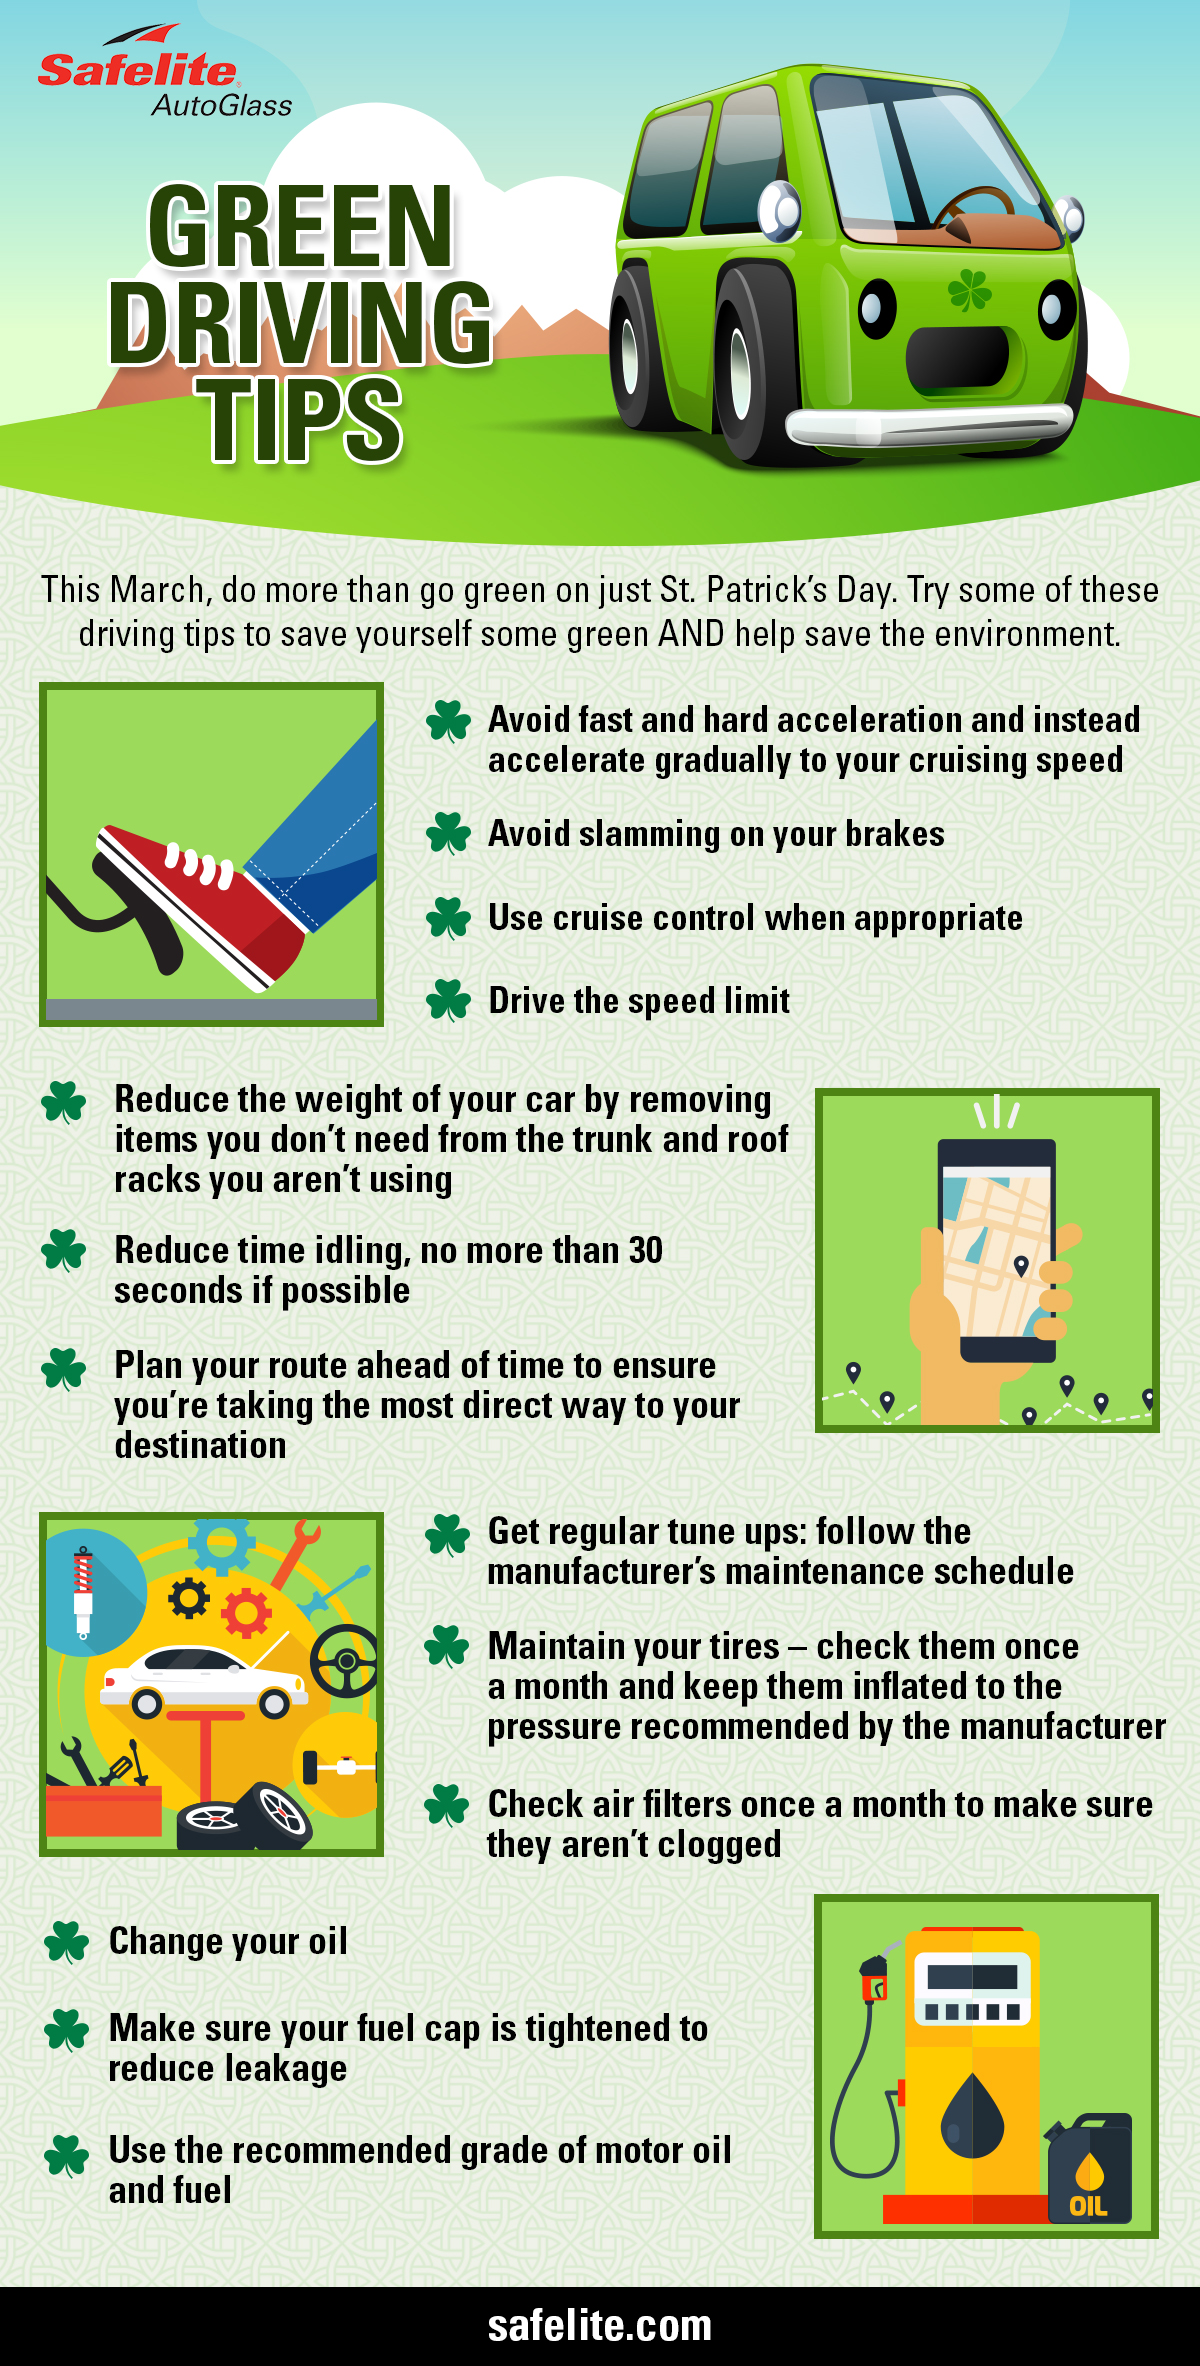 Check out these tips Safelite is offering to help you drive green this St. Patrick's Day!